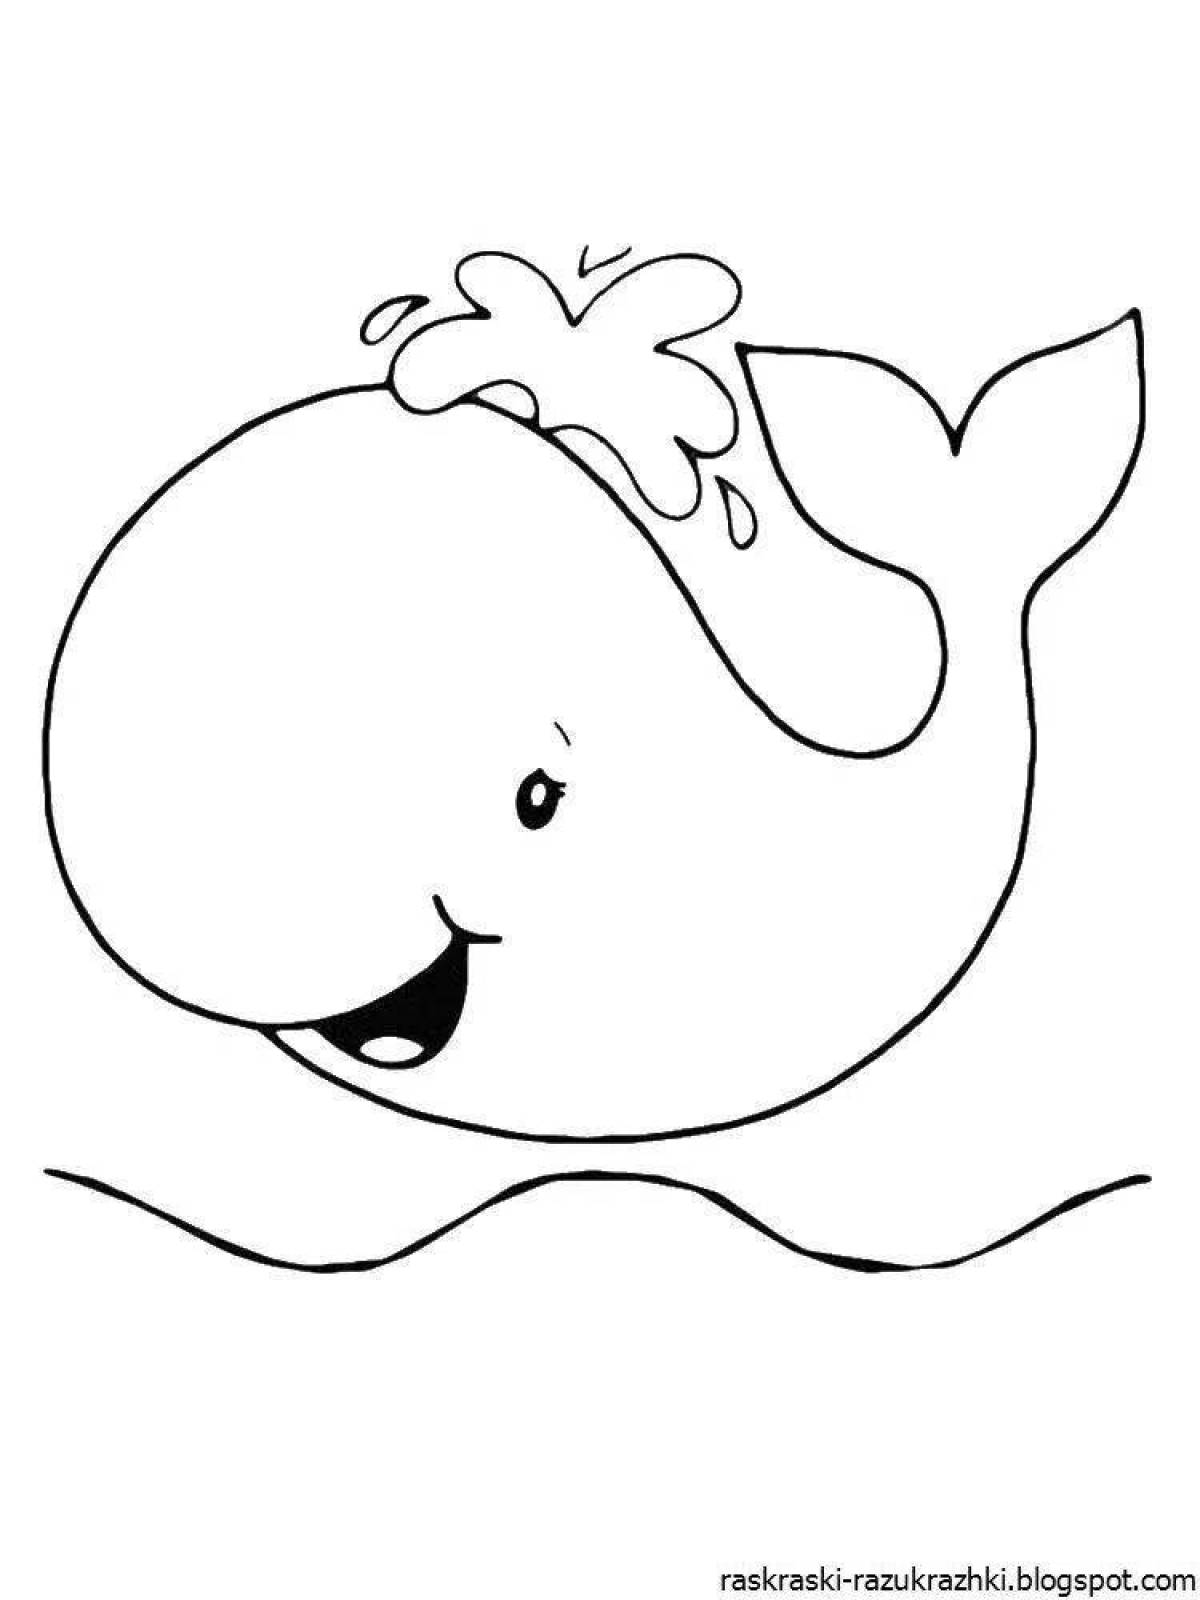 Colorful explosive whale coloring page for kids